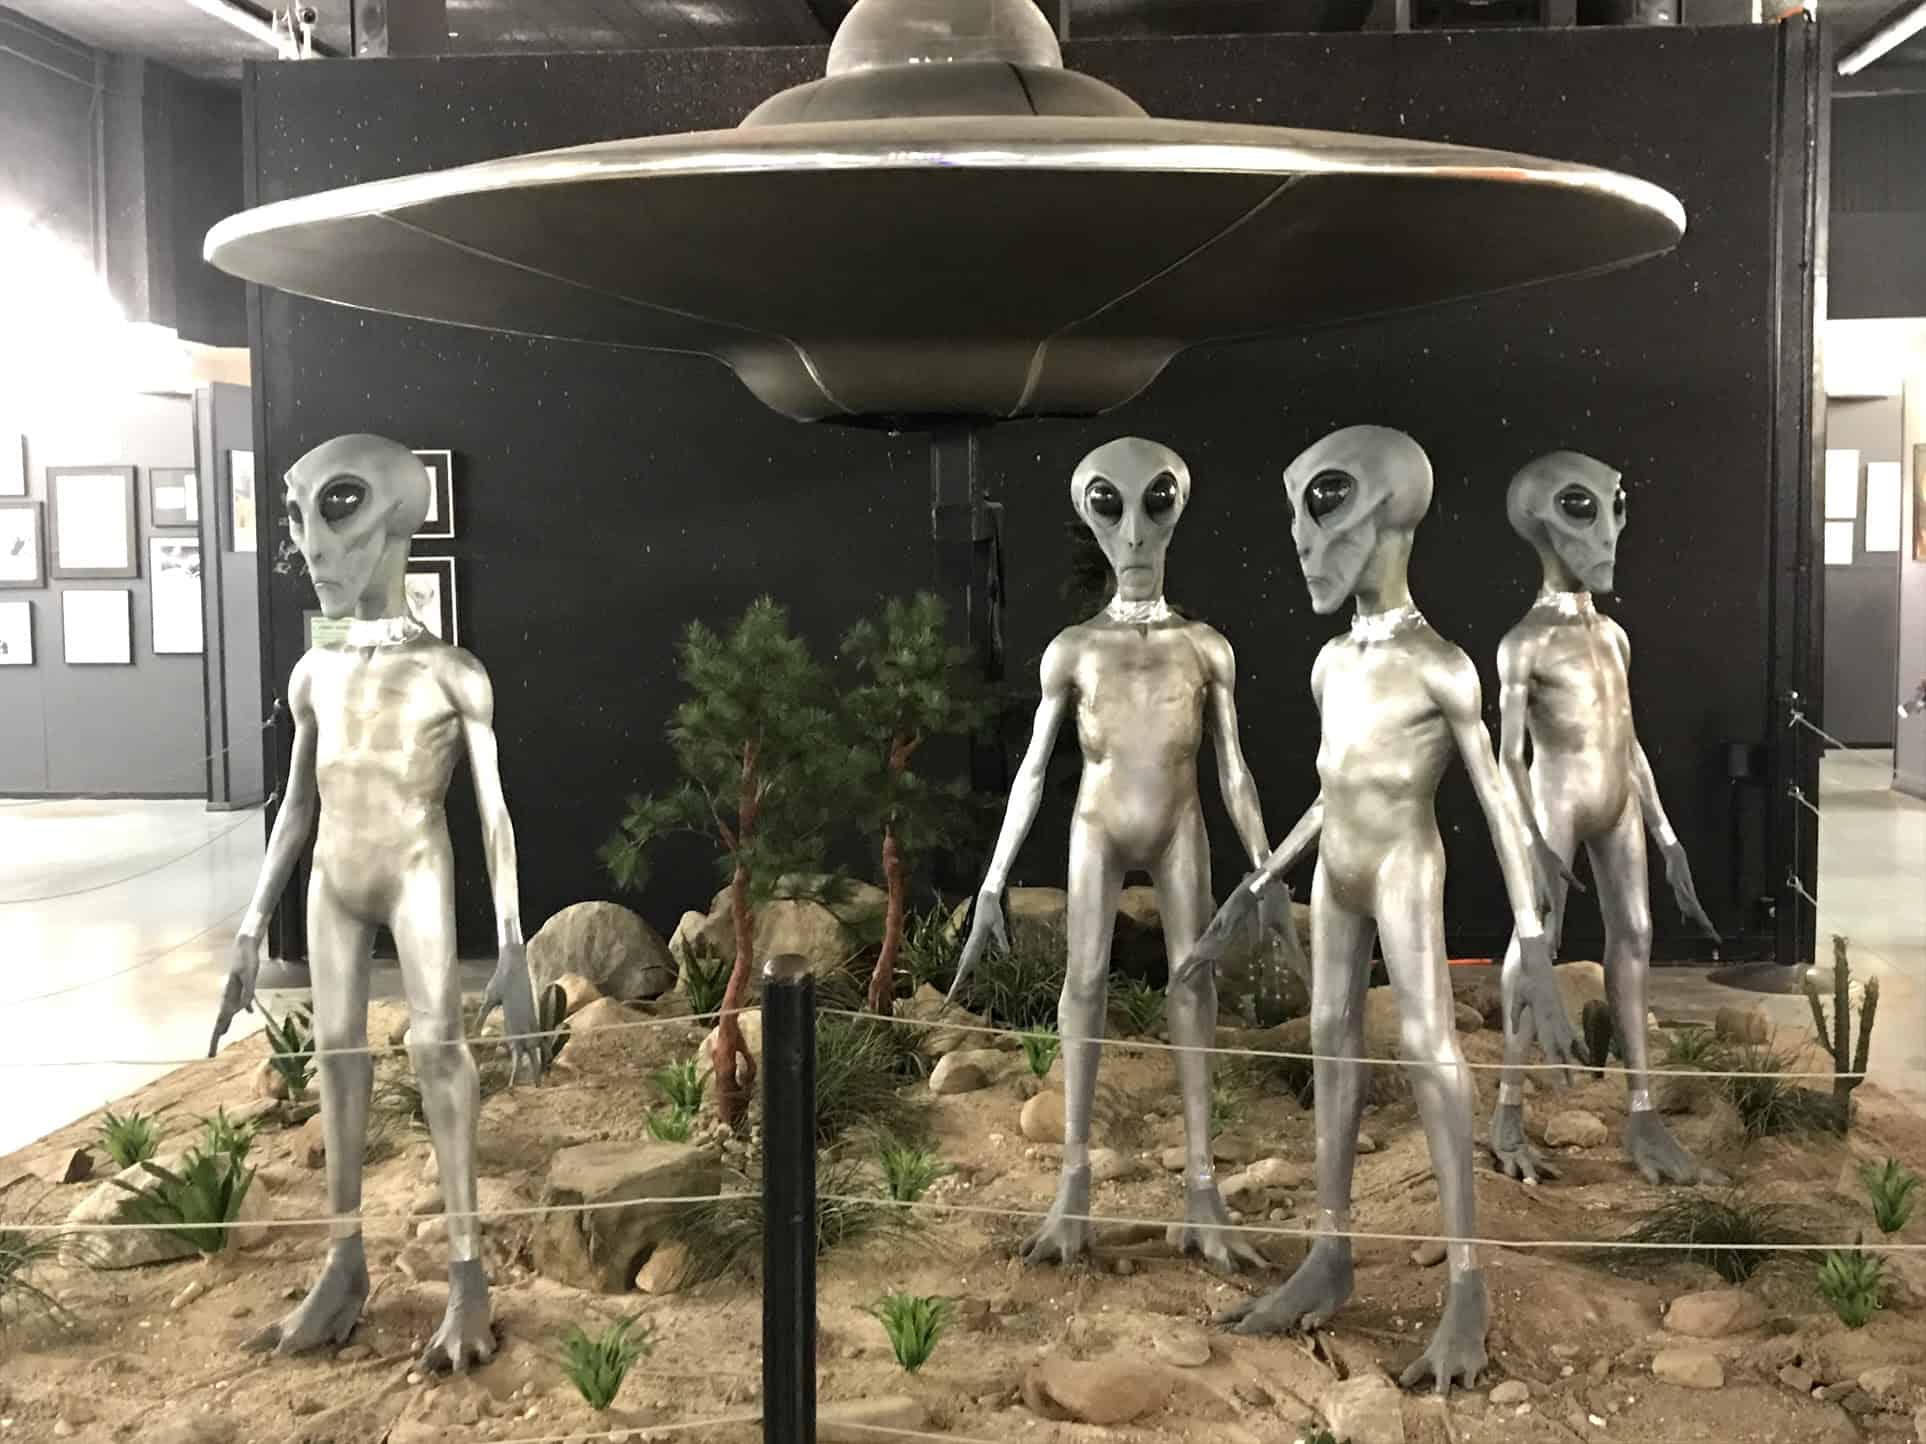 An Afternoon in Roswell: An Alien Encounter